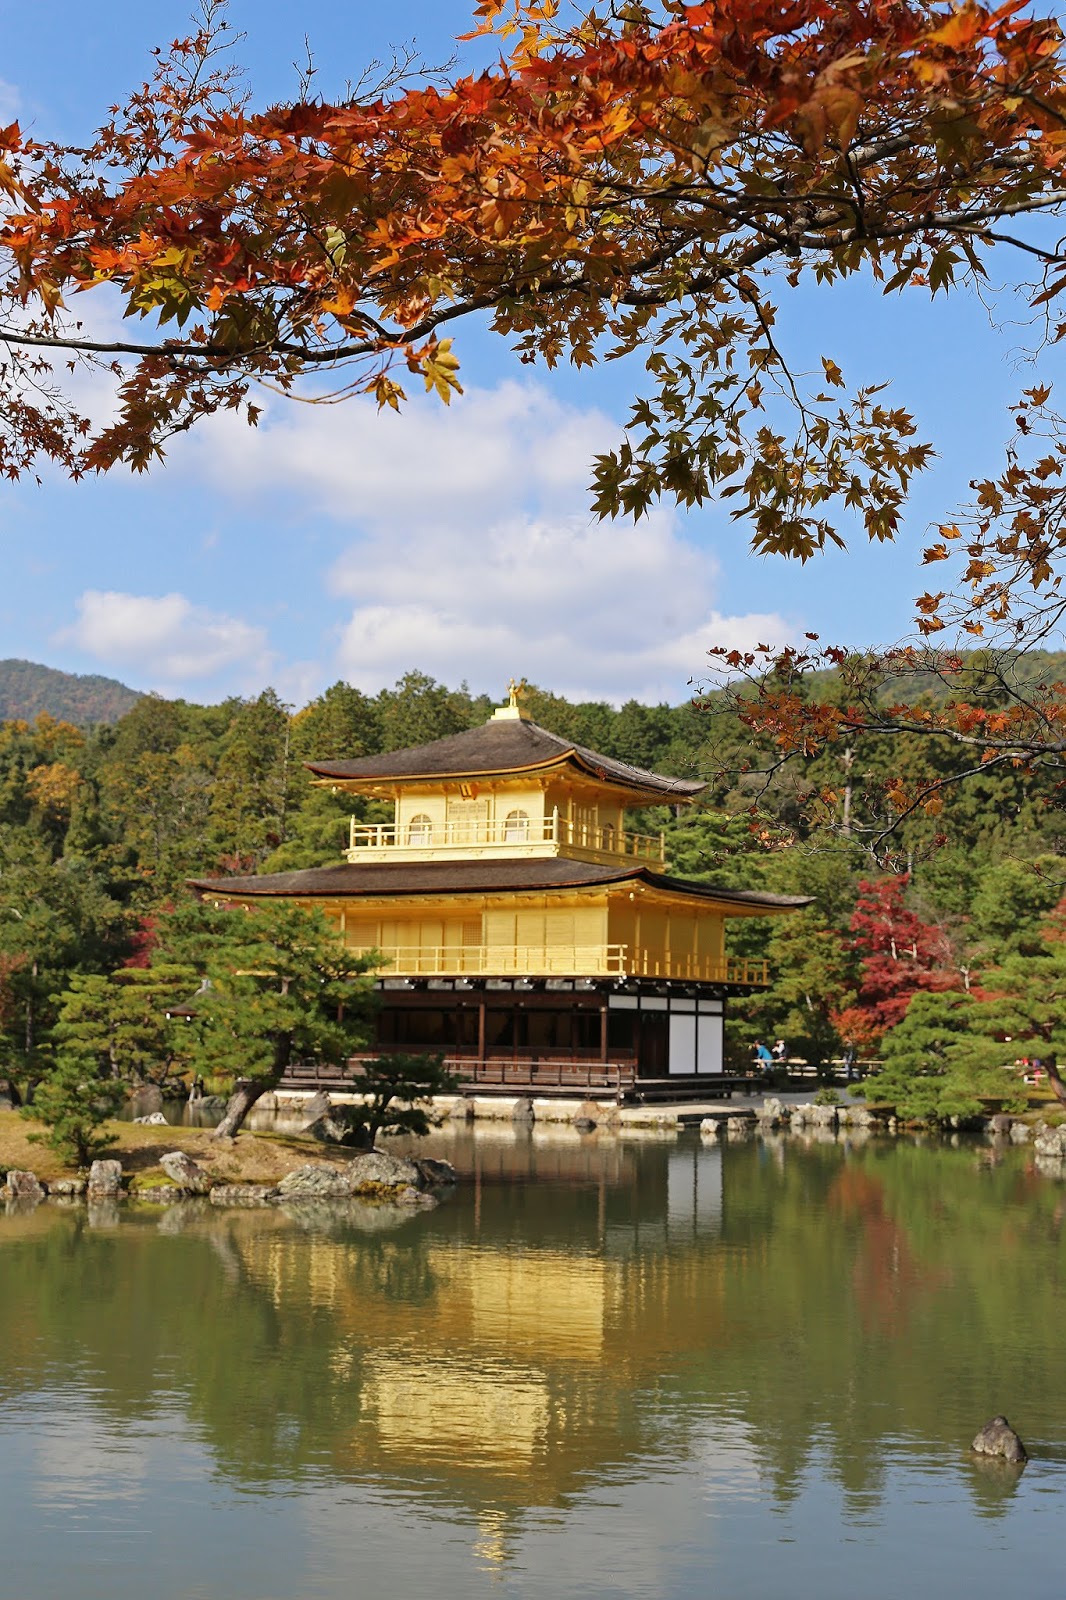 The Top 10 Things to See & Do in Kyoto, Japan by Posh, Broke, & Bored